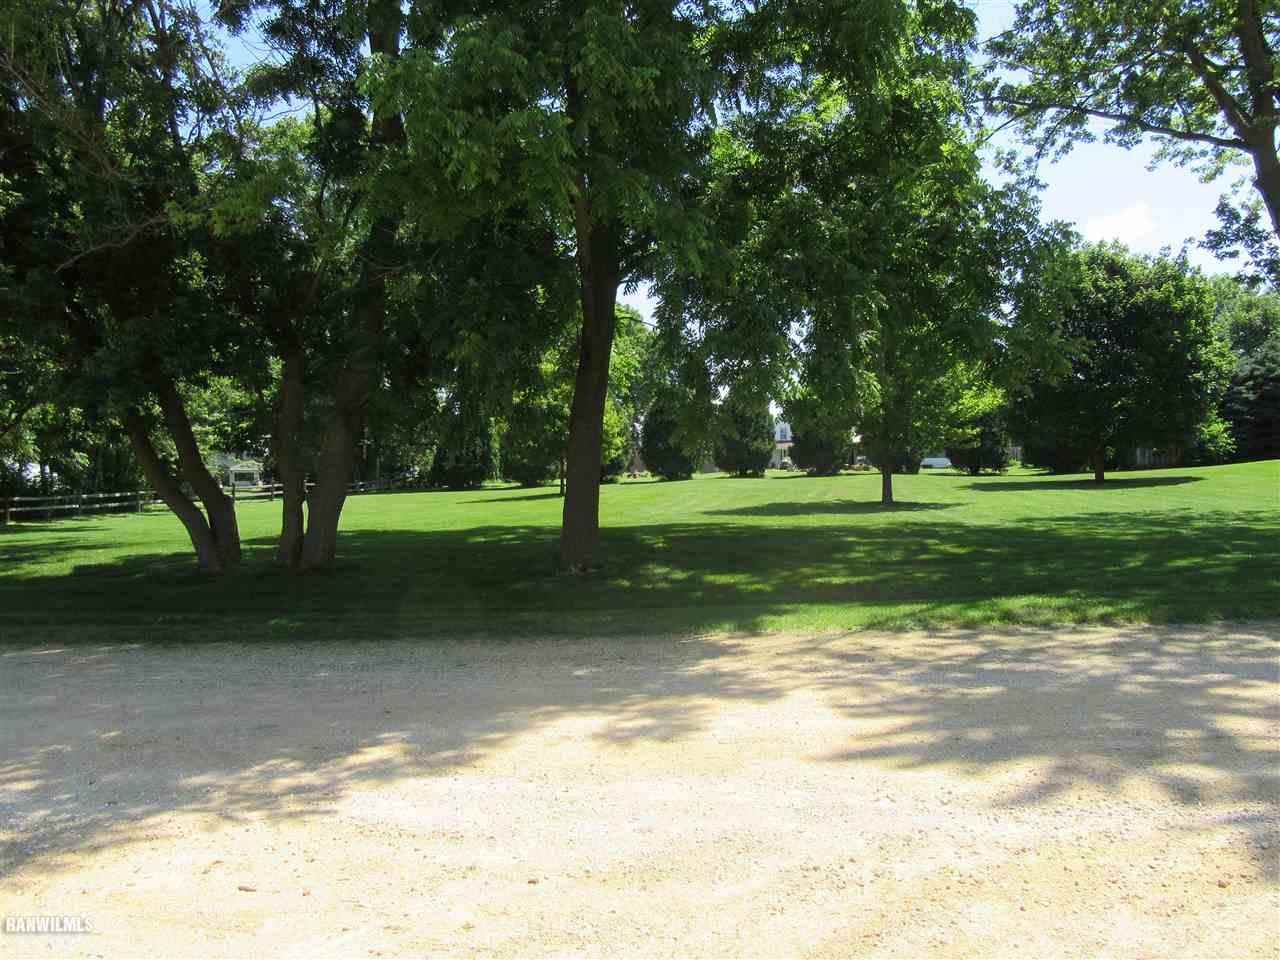 a view of a park with tree s